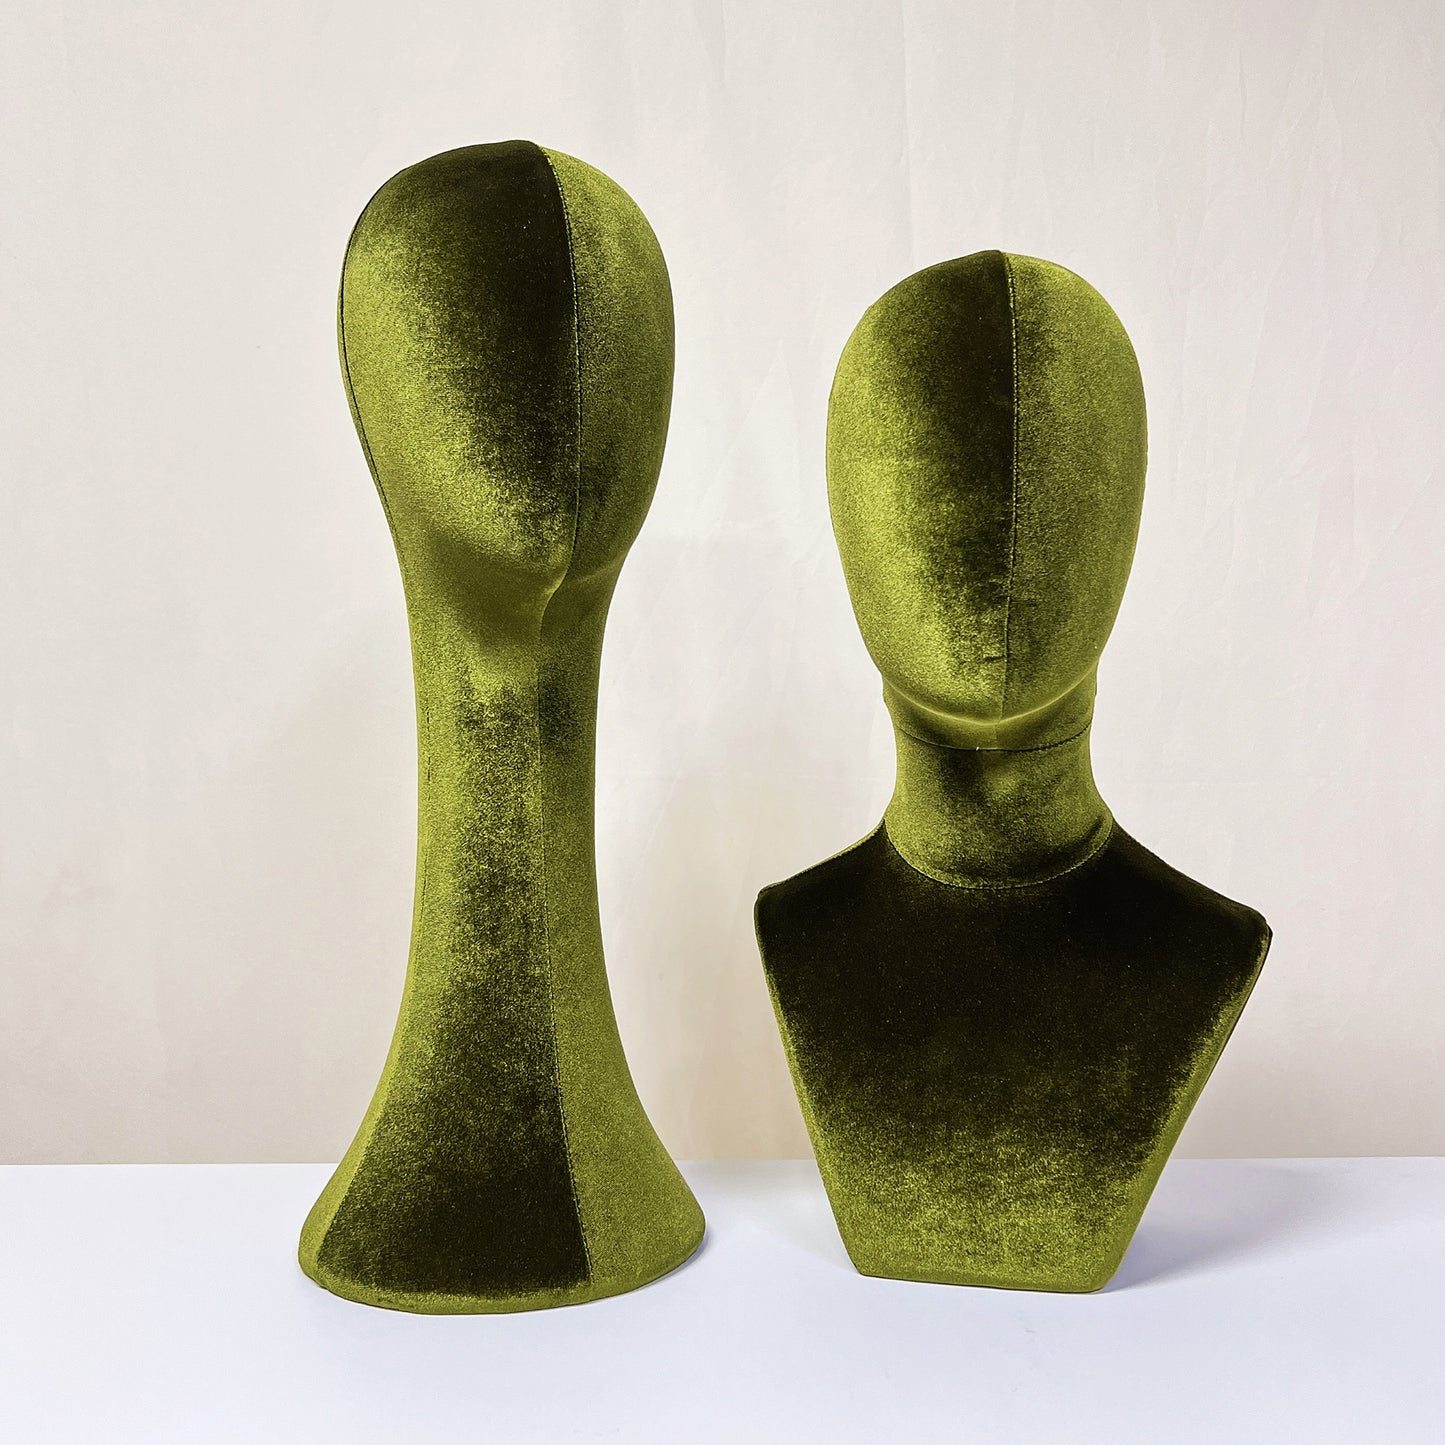 Luxurious Olive-Green Velvet Head Model, Can Pinnable Cloth Head Mannequin, Head Hat Stand/Display, Lace Head Wig Stand, Hat Rack W/ Fabric DE-LIANG